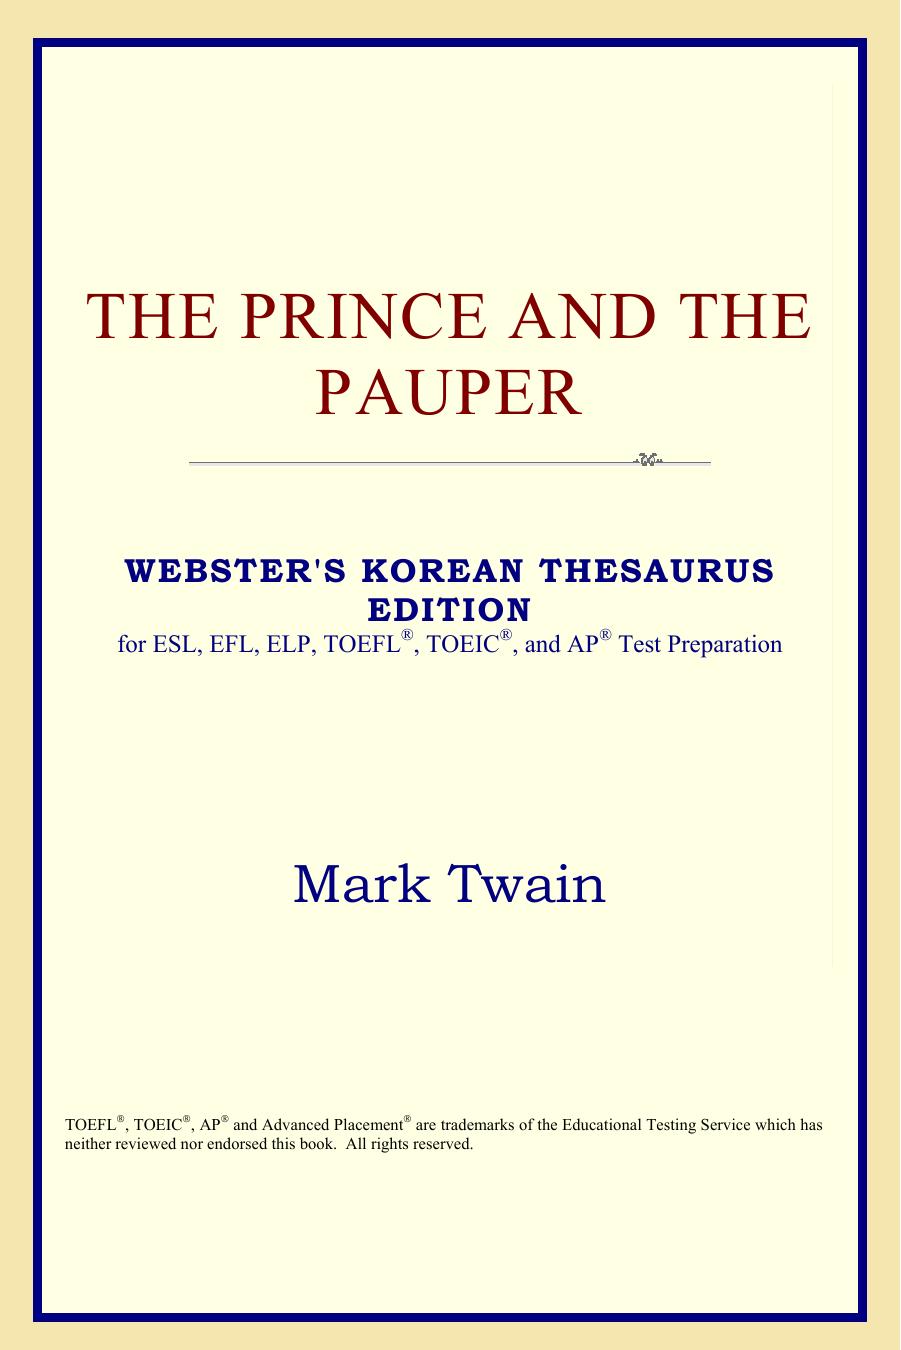 The Prince and the Pauper (Websters Korean Thesaurus Edition)